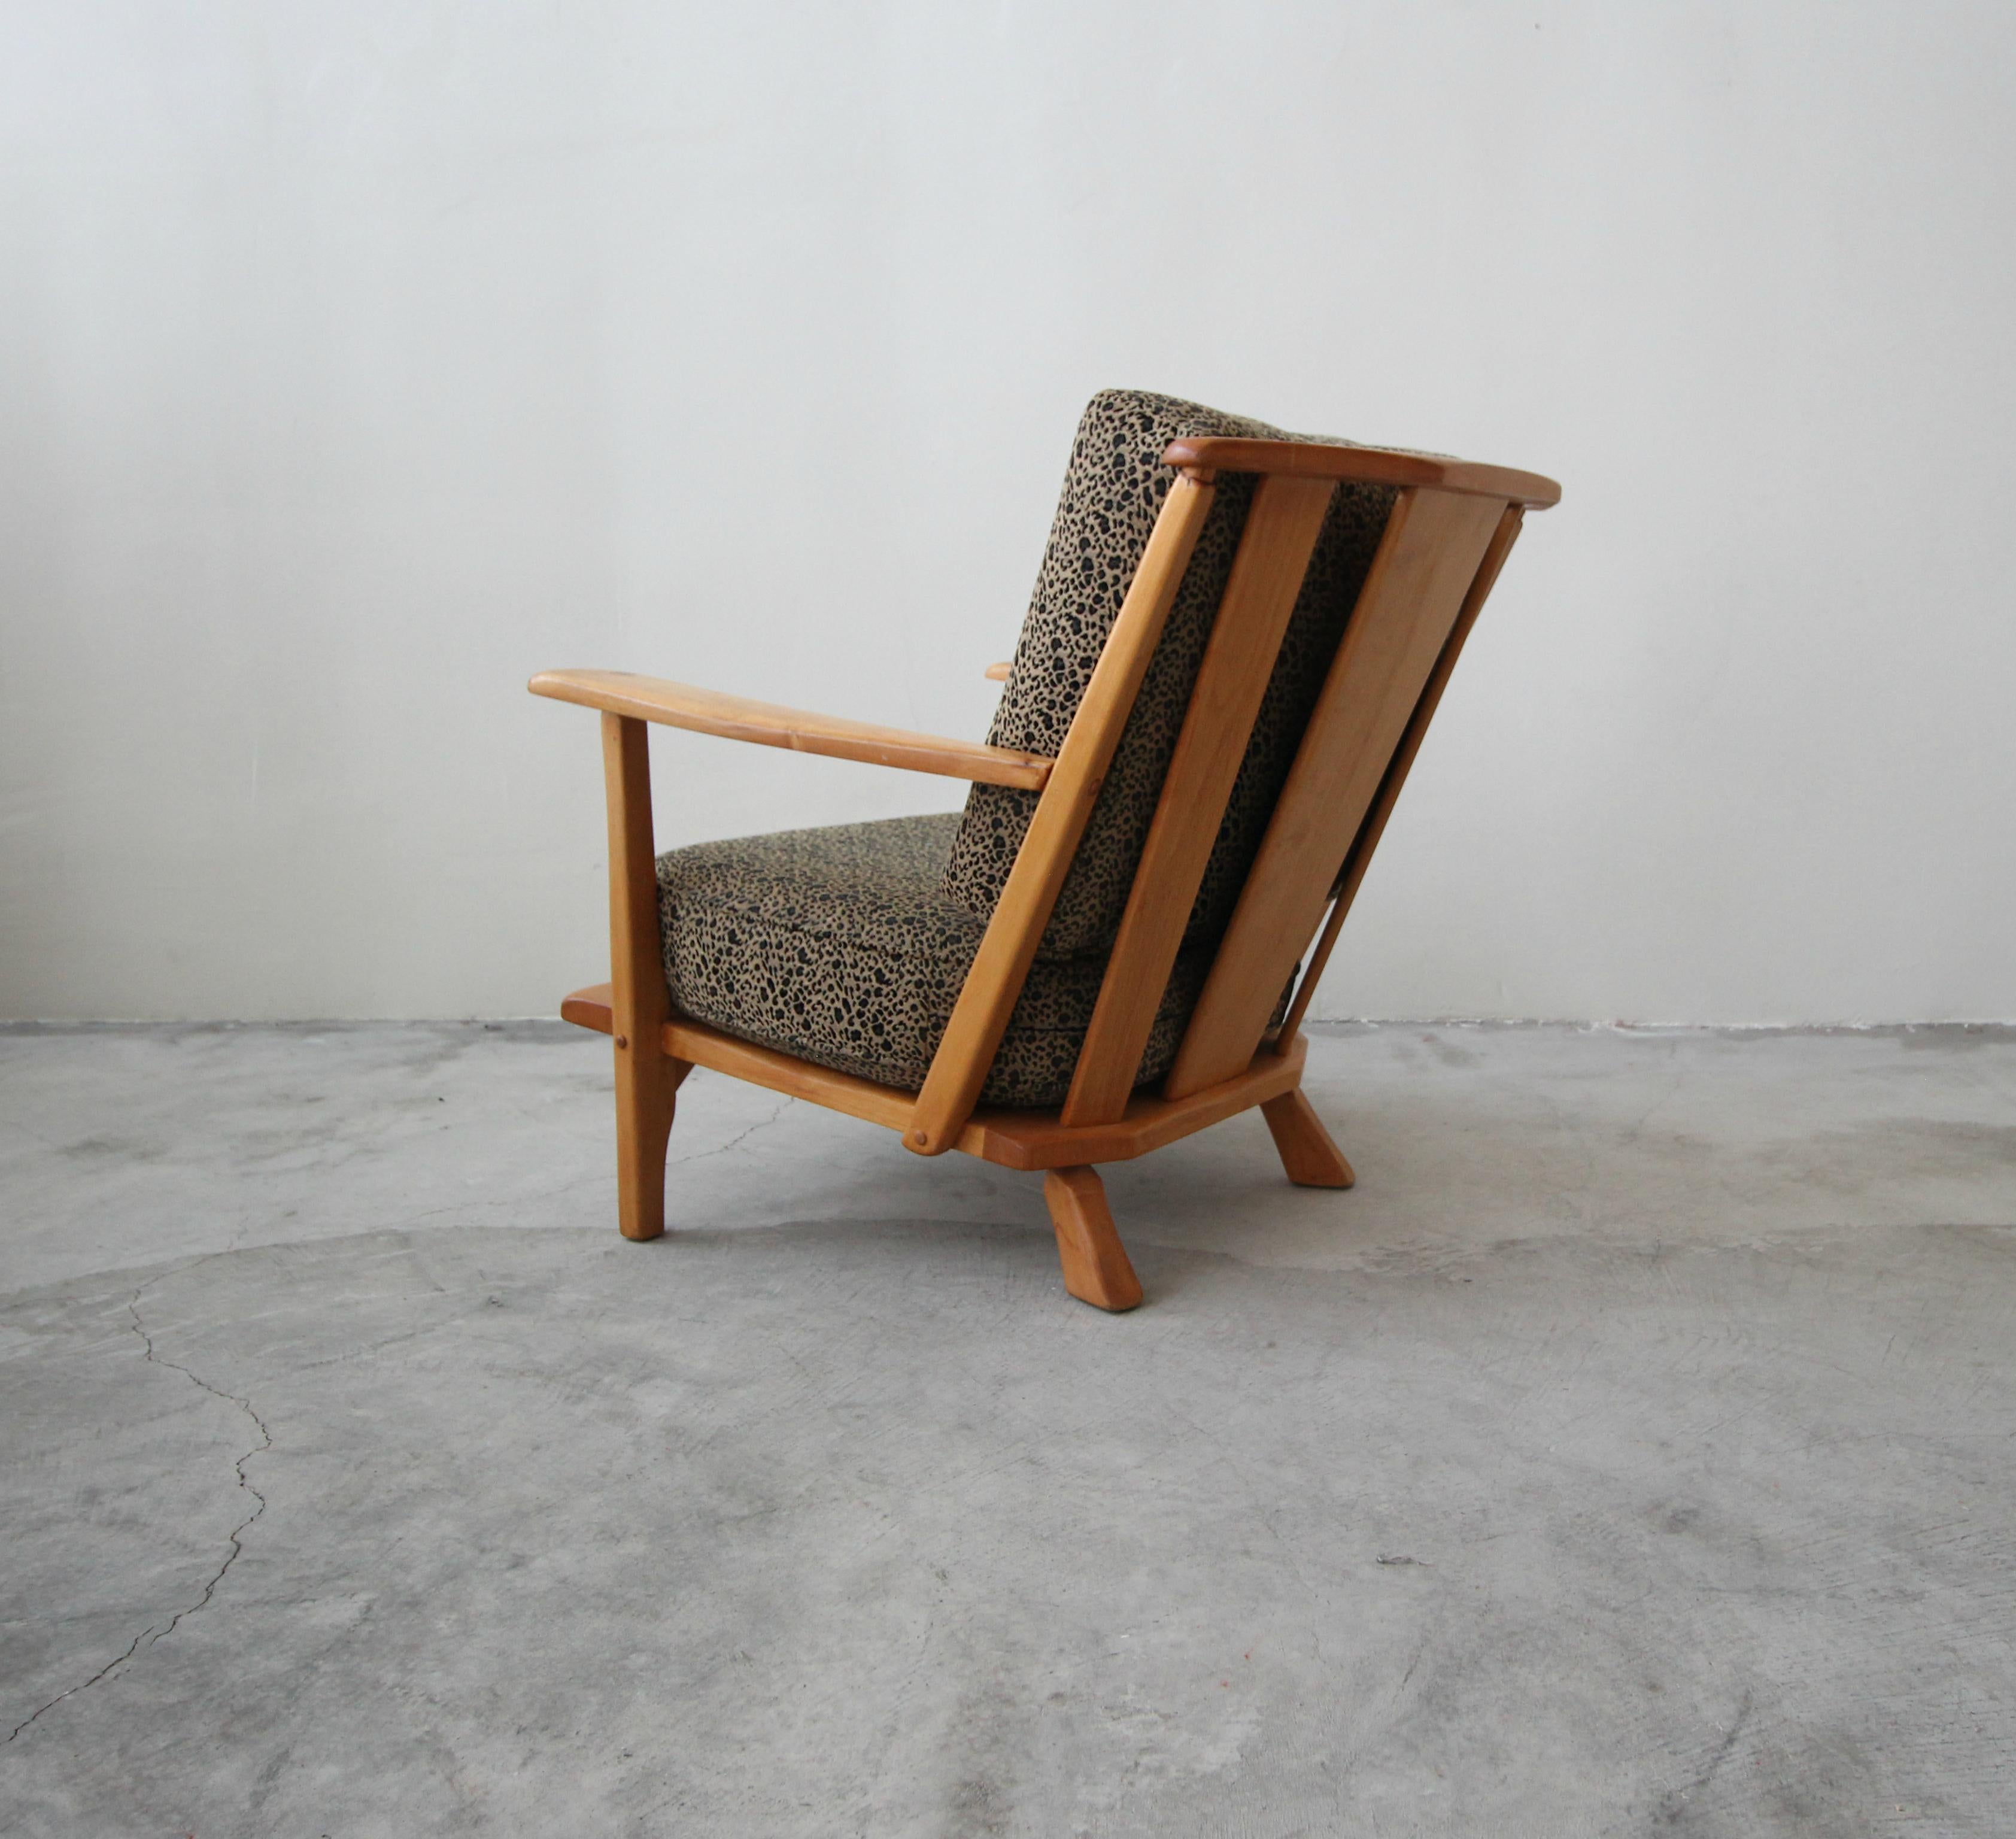 20th Century Midcentury Craftsman Style Lounge Chair by Cushman